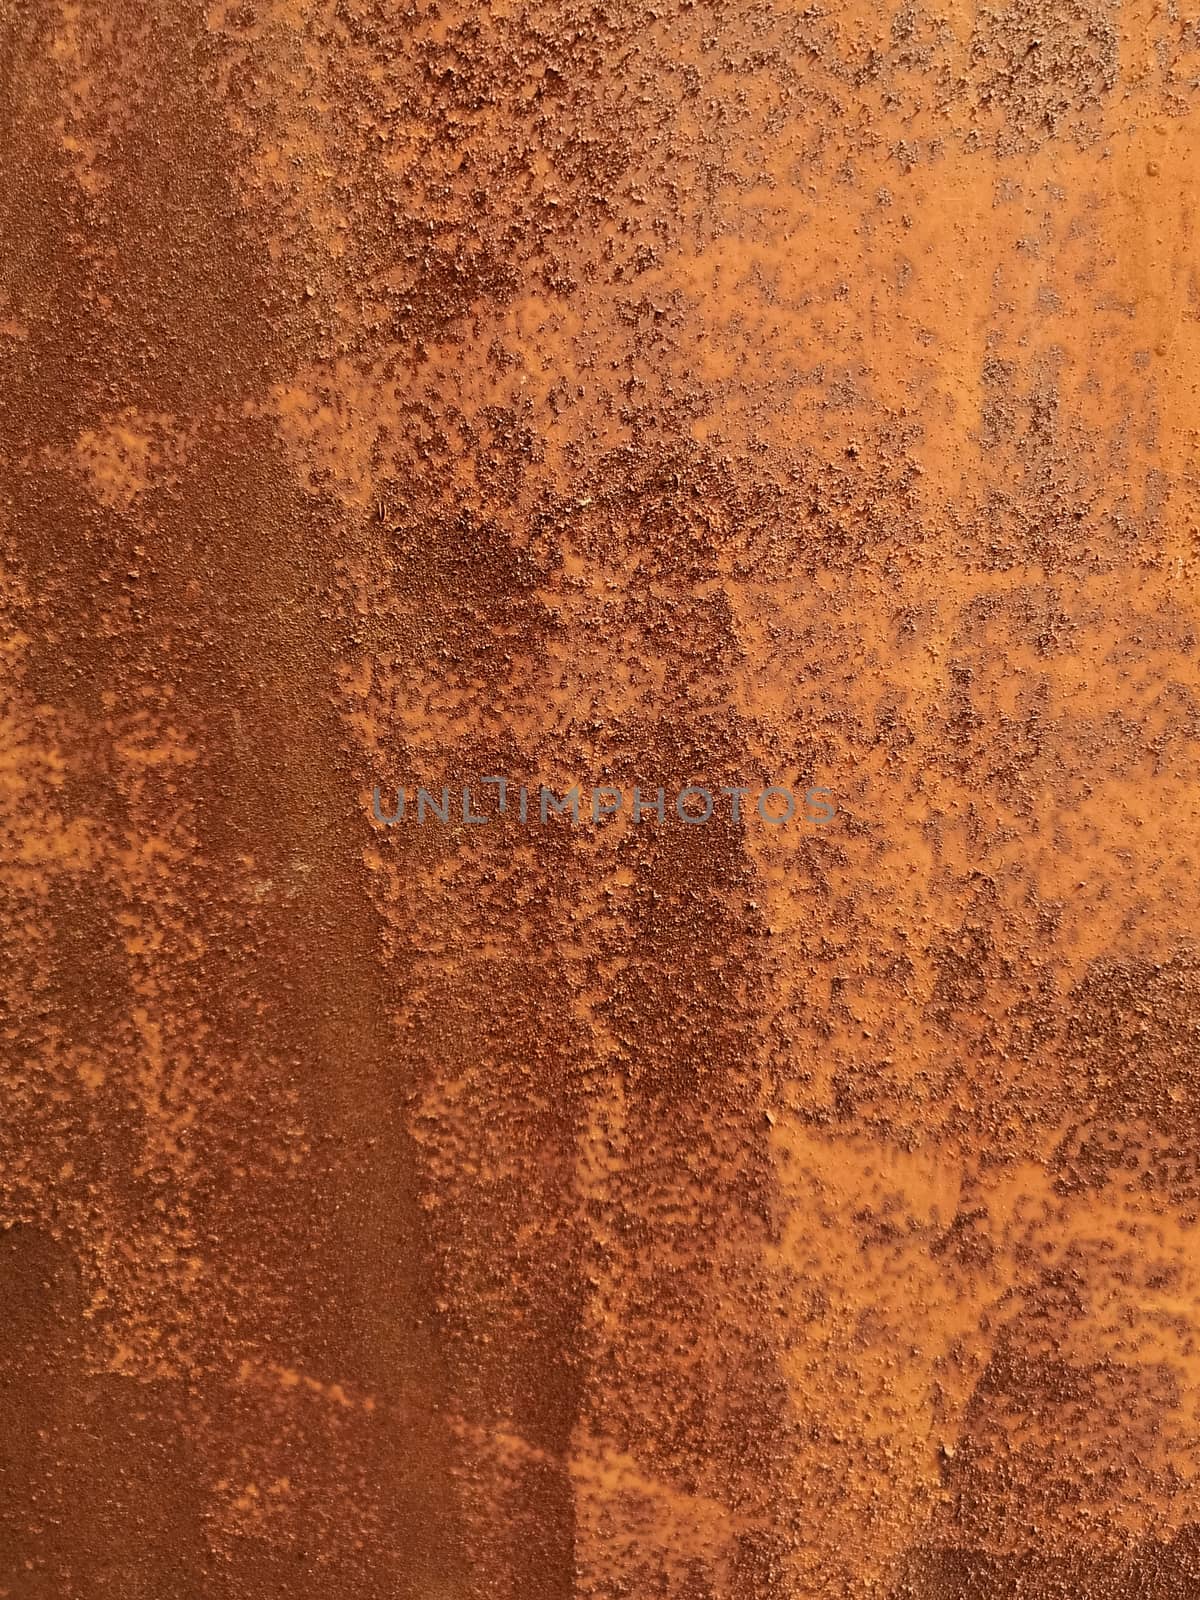 Rusty metal surface texture close up photo. Texture for designers.